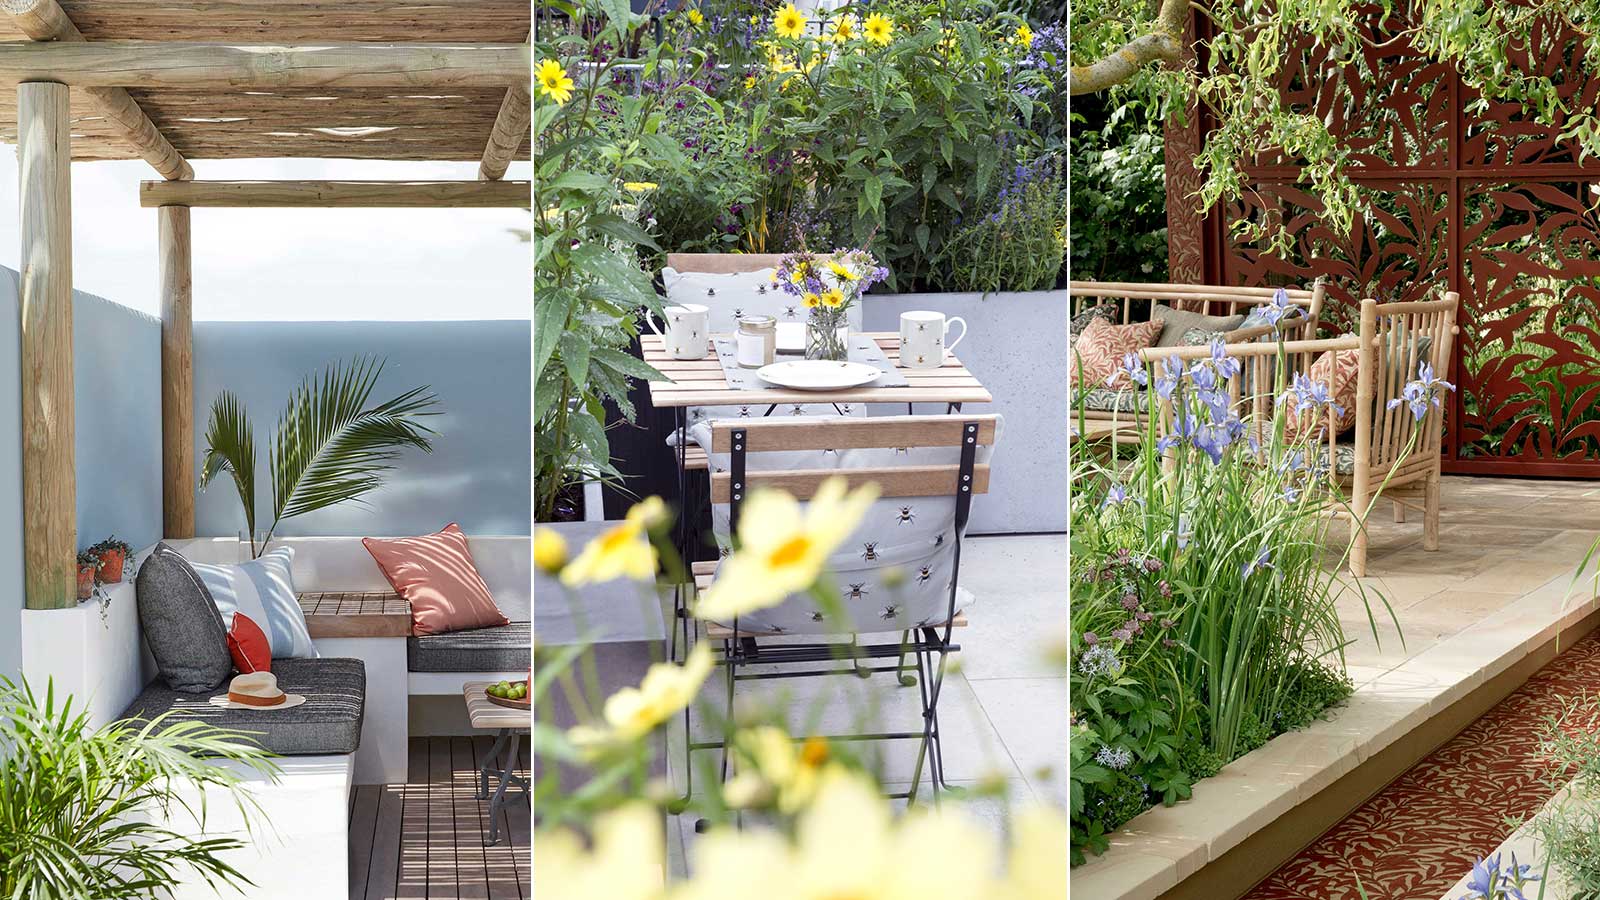 Patio privacy ideas: 11 looks for a private outdoor oasis